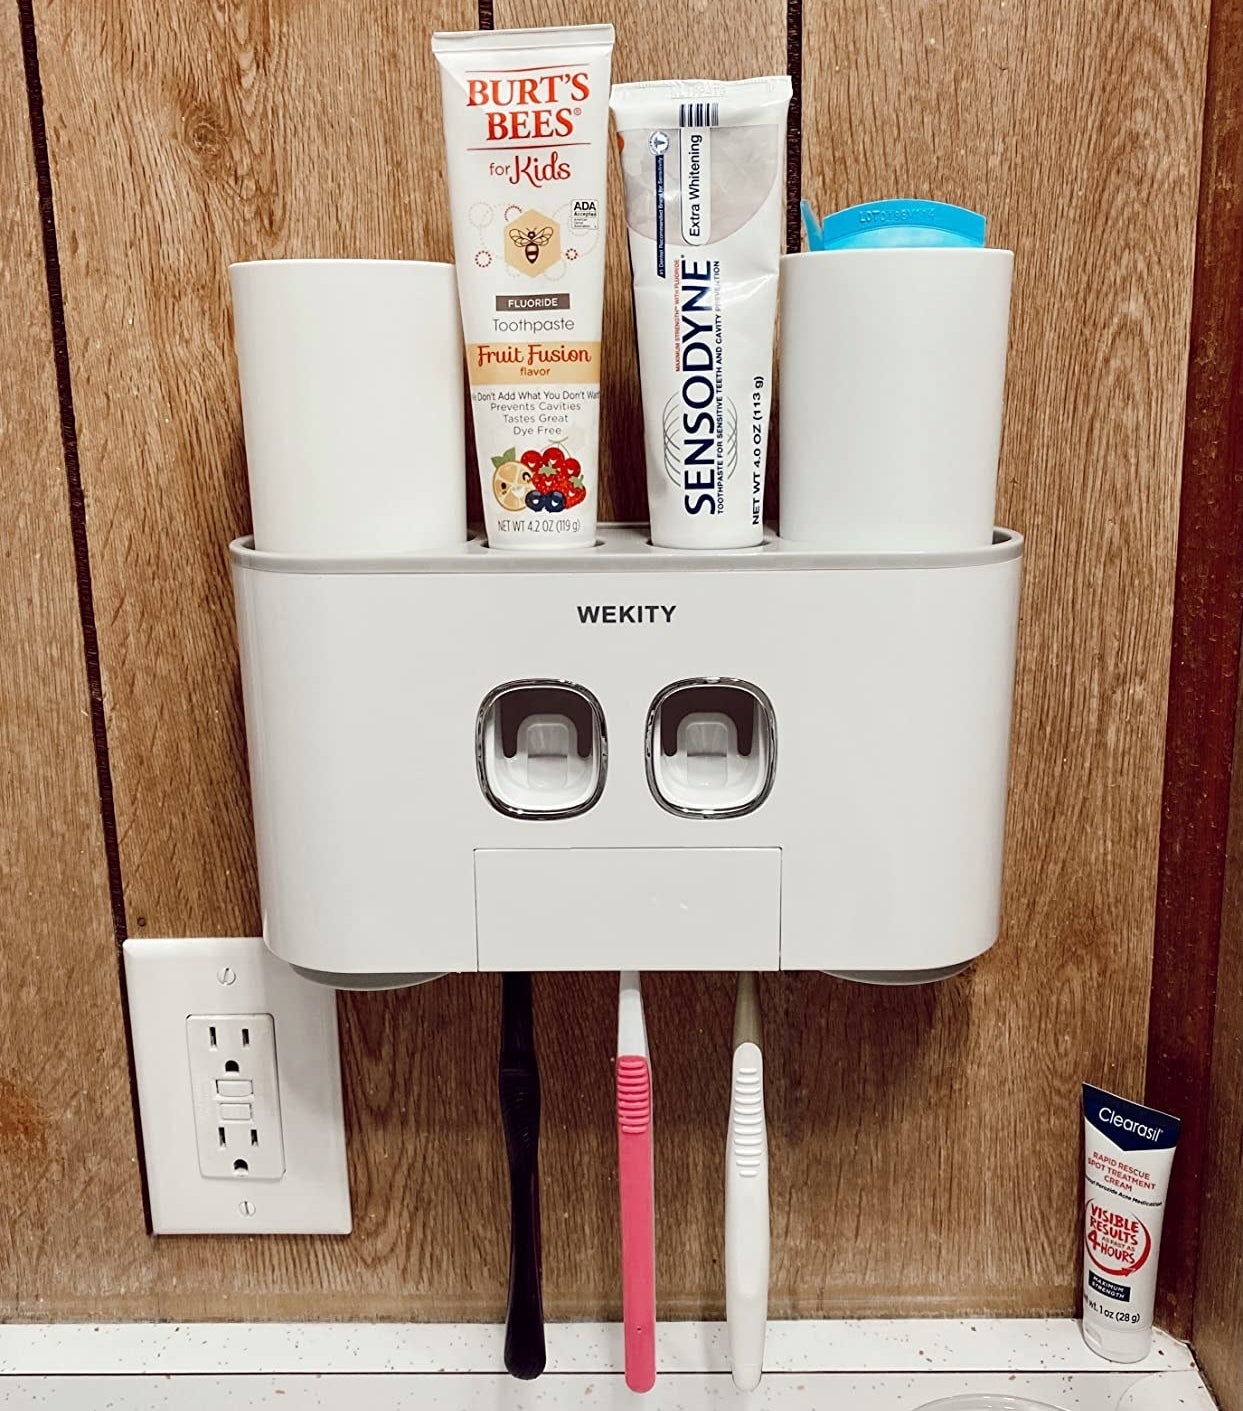 the white wall mounted toothbrush holder